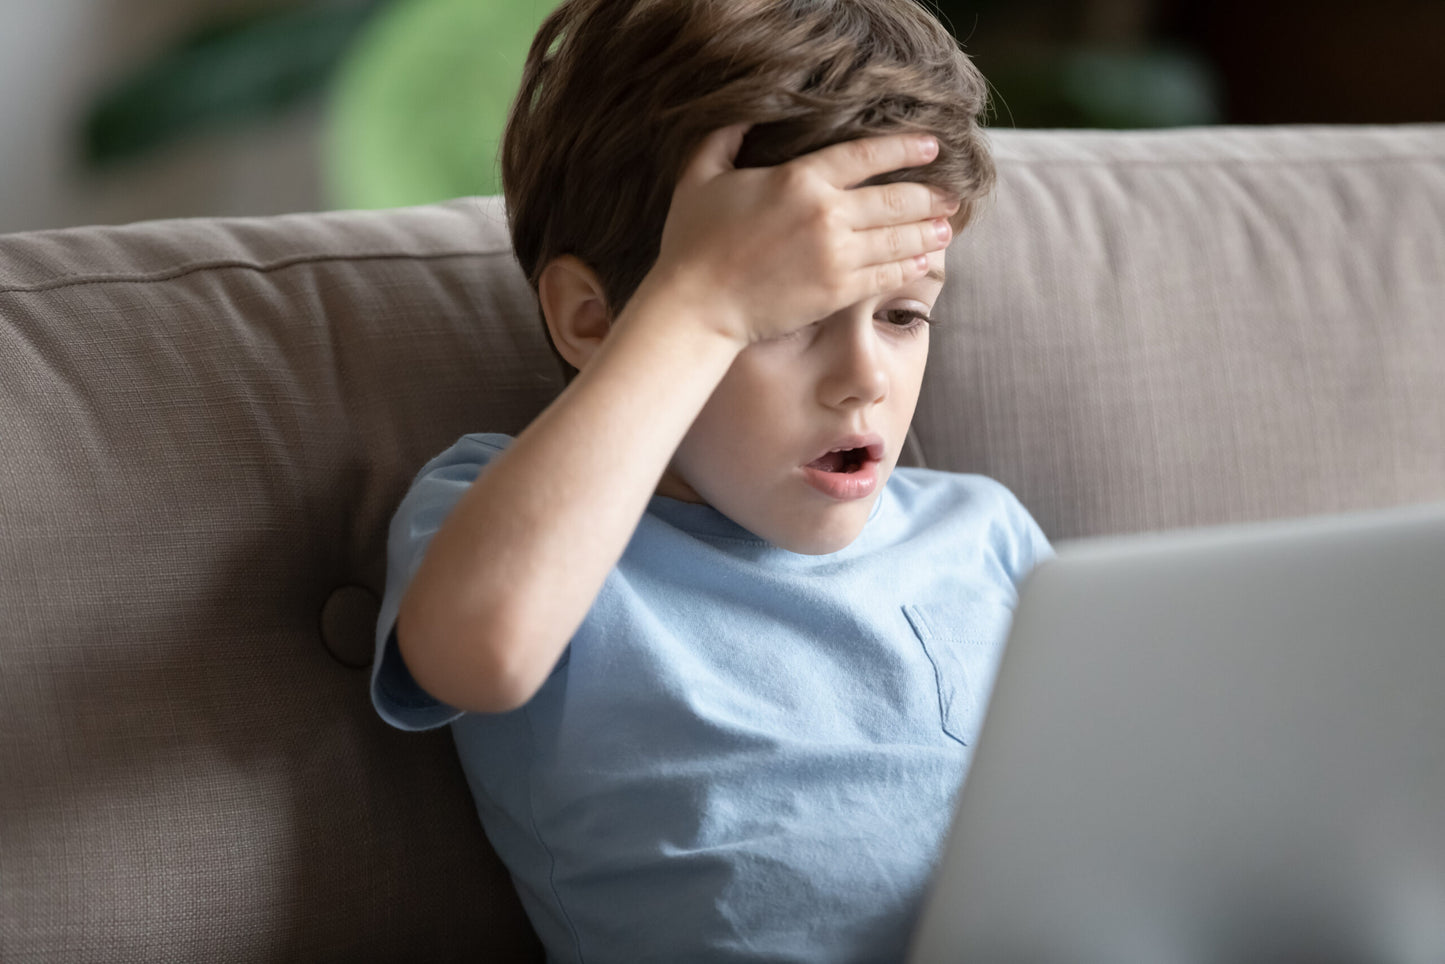 Photo of a young child with a laptop on lap, and shocked look on his face as he looks at the screen